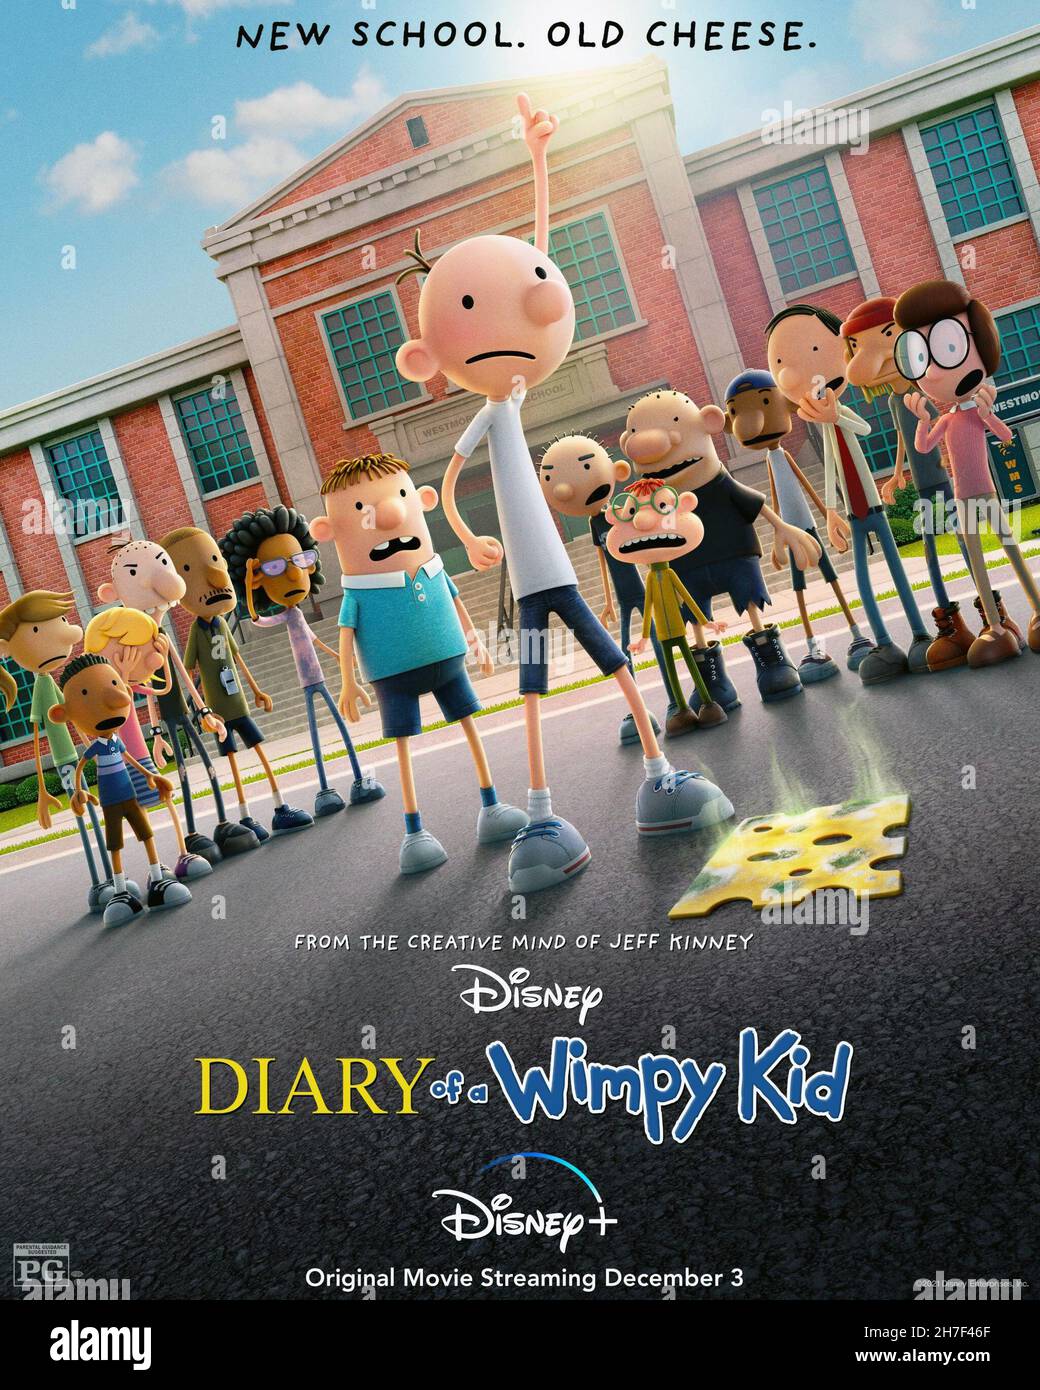 DIARY OF A WIMPY KID, US poster, Greg Heffley (voice: Brady Noon